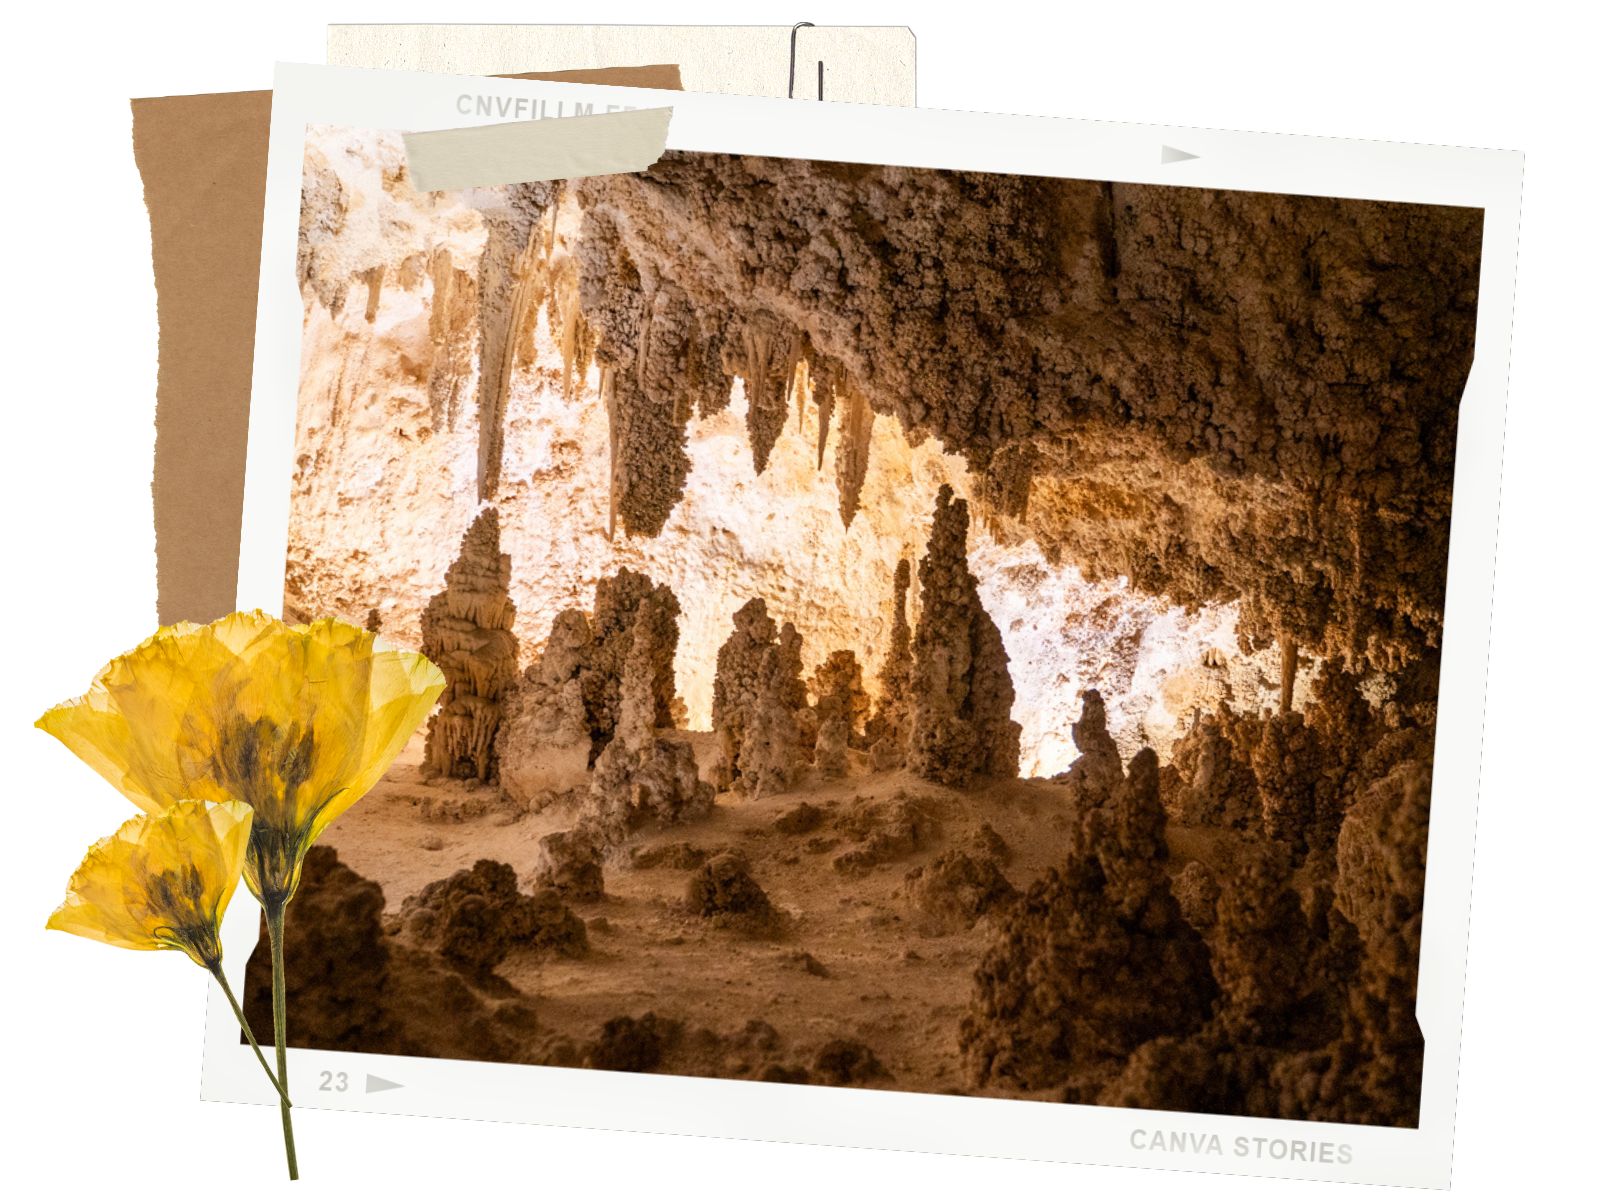 Carlsbad Caverns Big Room: Everything You Need to Know - Important Info